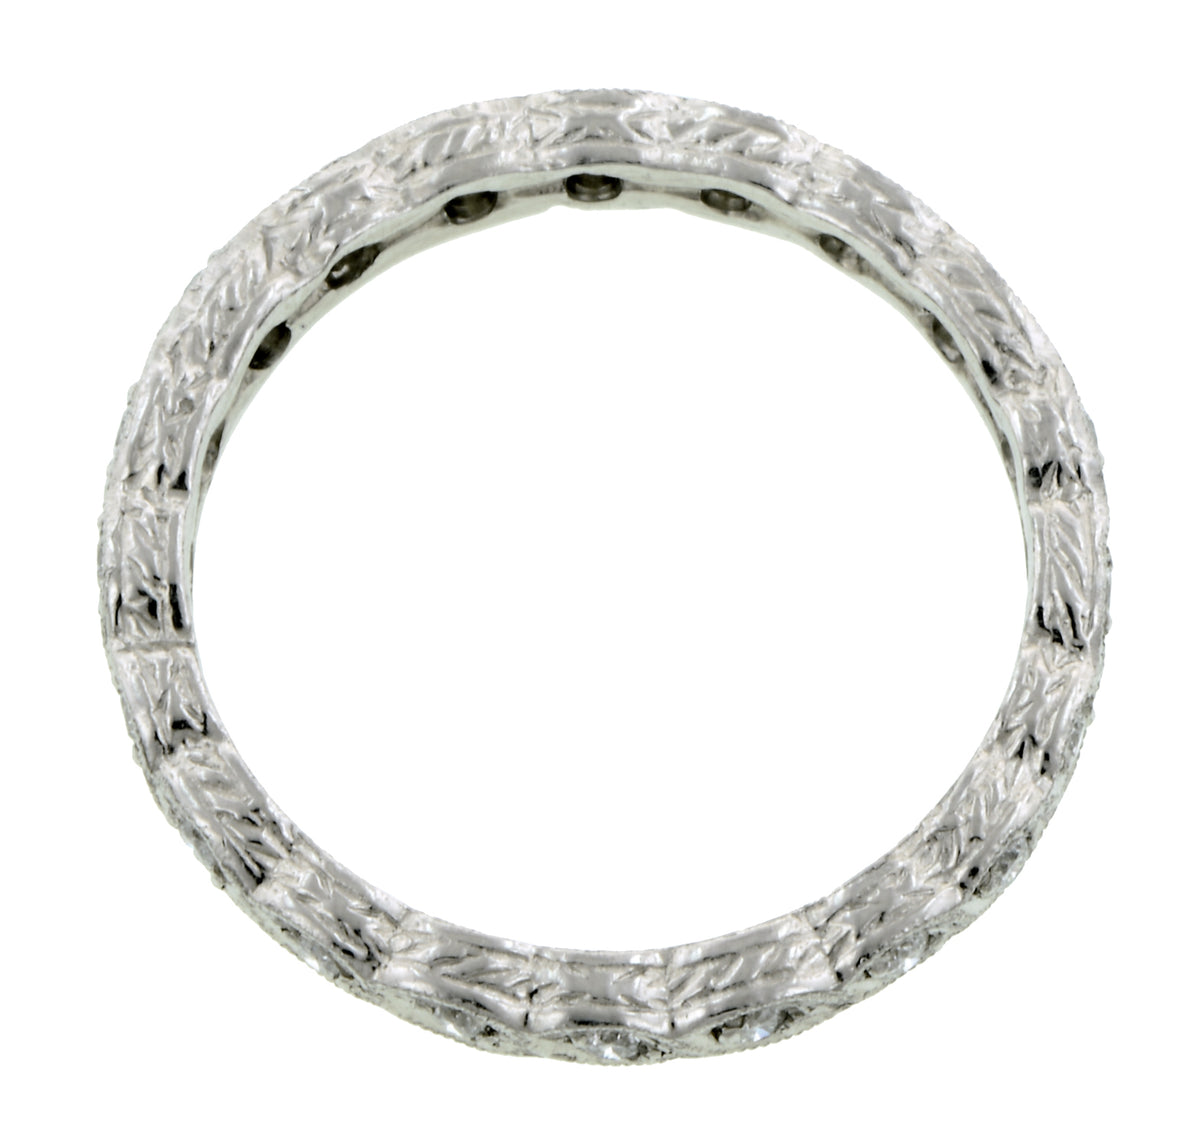 Contemporary ring: a Platinum Diamond Eternity Twist Design Band sold by Doyle & Doyle vintage and antique jewelry boutique.